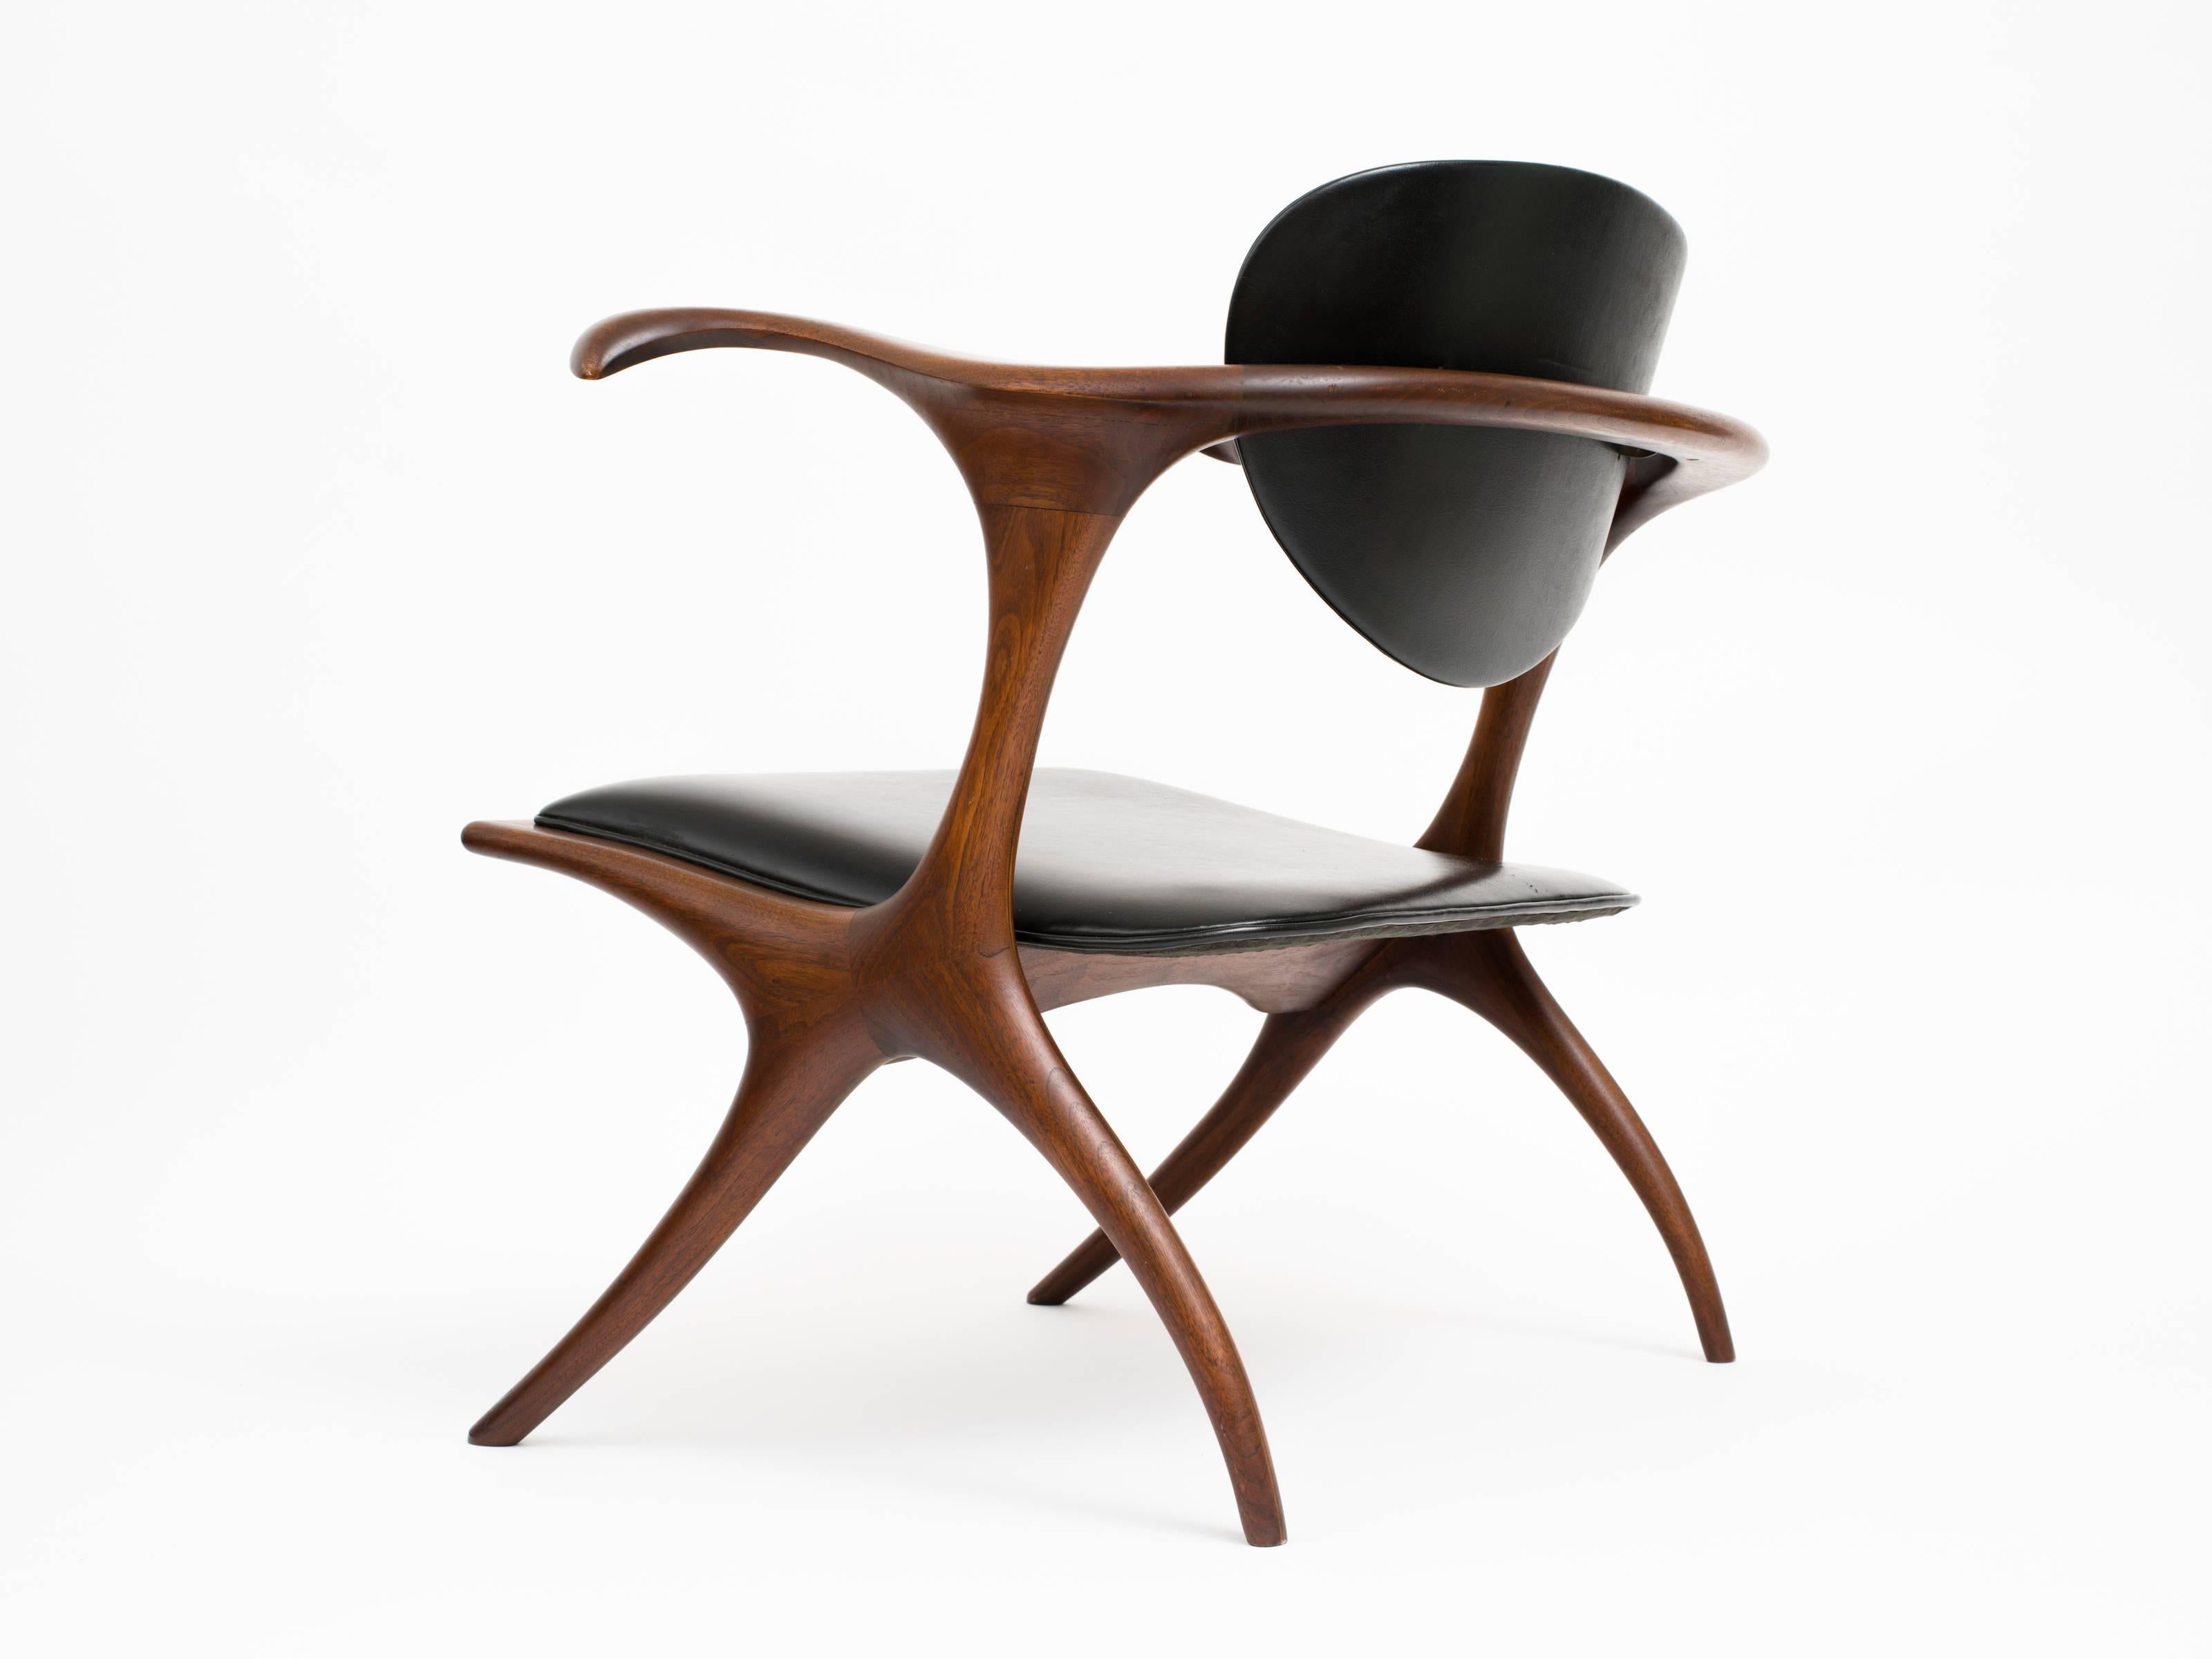 The 'Sculptured' chair was originally designed in 1953 by Pacific Northwest master craftsman and cabinetmaker, Evert Sodergren, and it is the crown jewel of his oeuvre which spanned over 60 years. Part of the first wave of the American Studio Craft